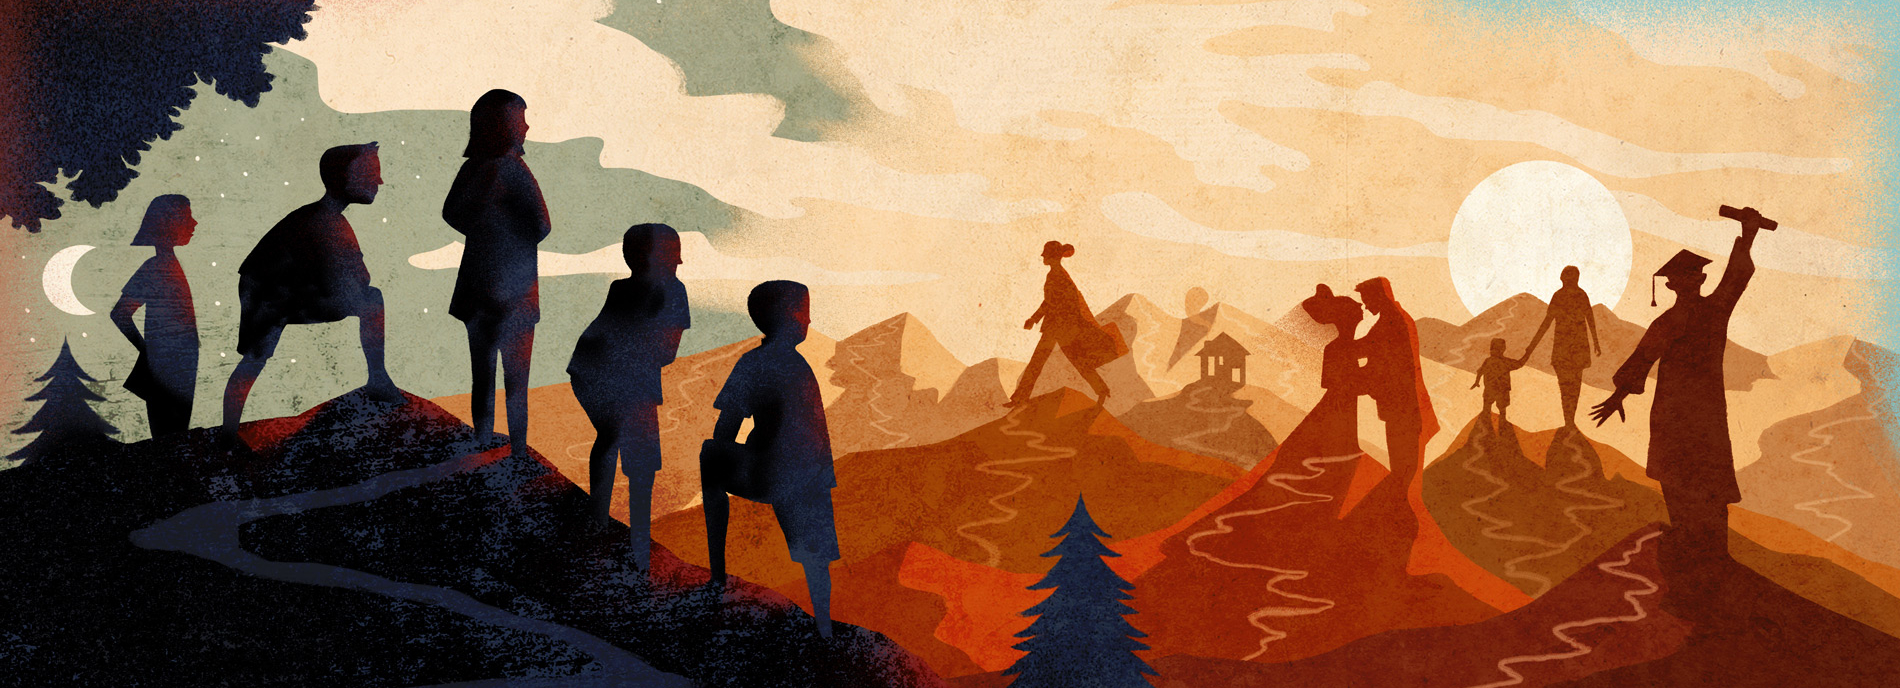 Children in the foreground look out from the darkness into the bright background, under a rising sun. The image suggests a triumphant life ahead, in which autism is overcome and left behind for good.